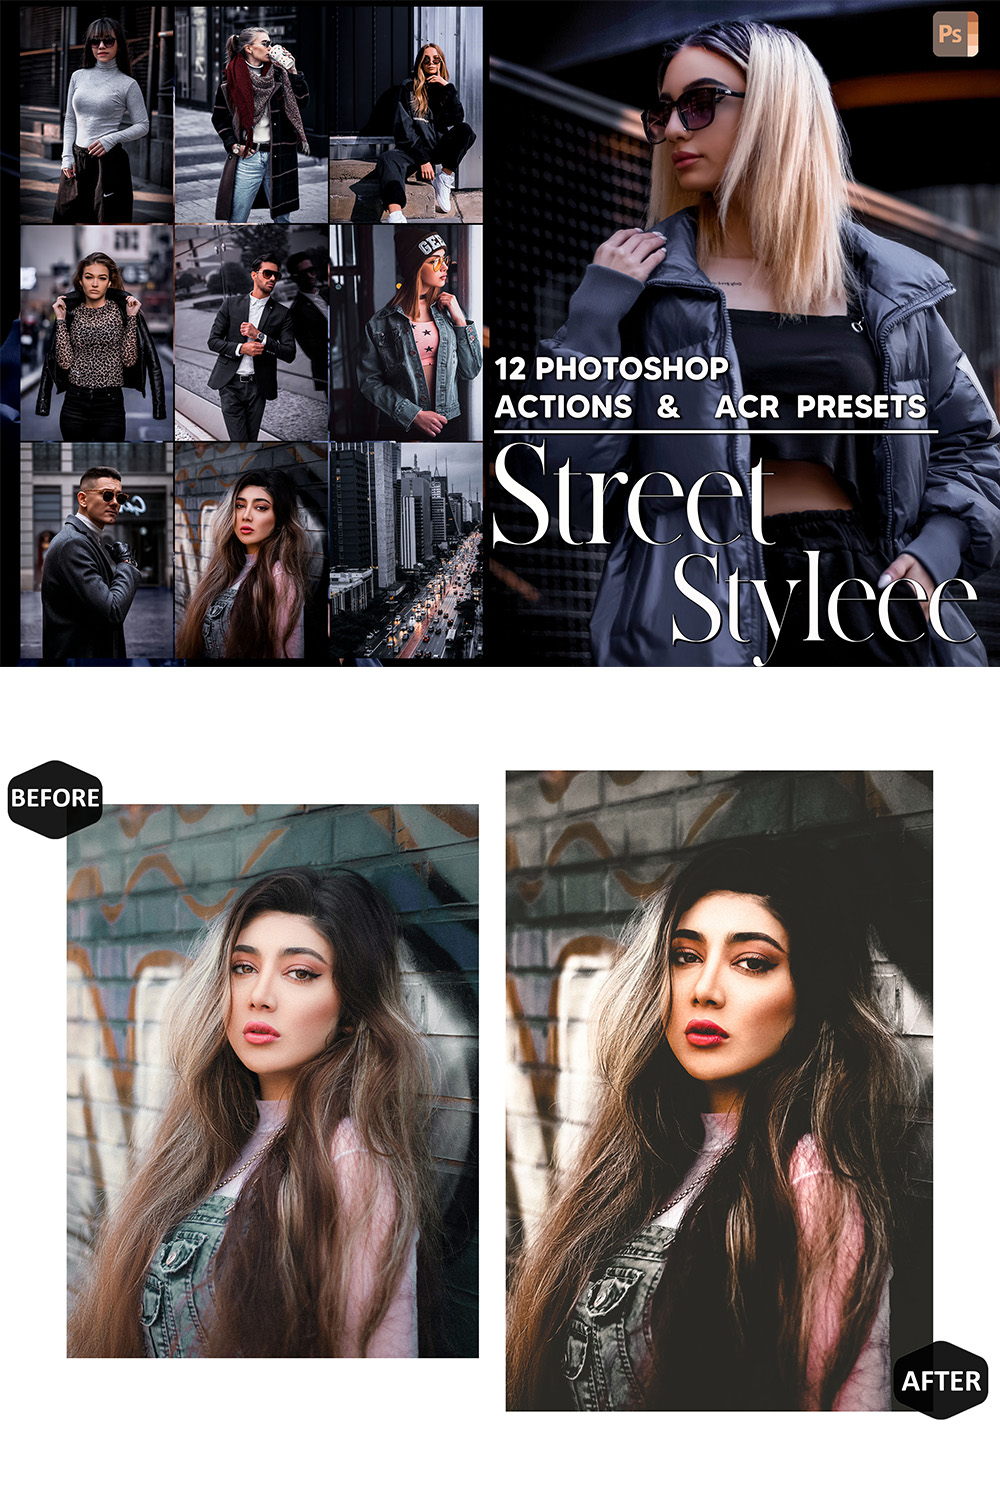 12 Photoshop Actions, Street Styleee Ps Action, City View ACR Preset, Portrait Ps Filter, Pictures And Style Theme For Instagram, Blogger pinterest preview image.